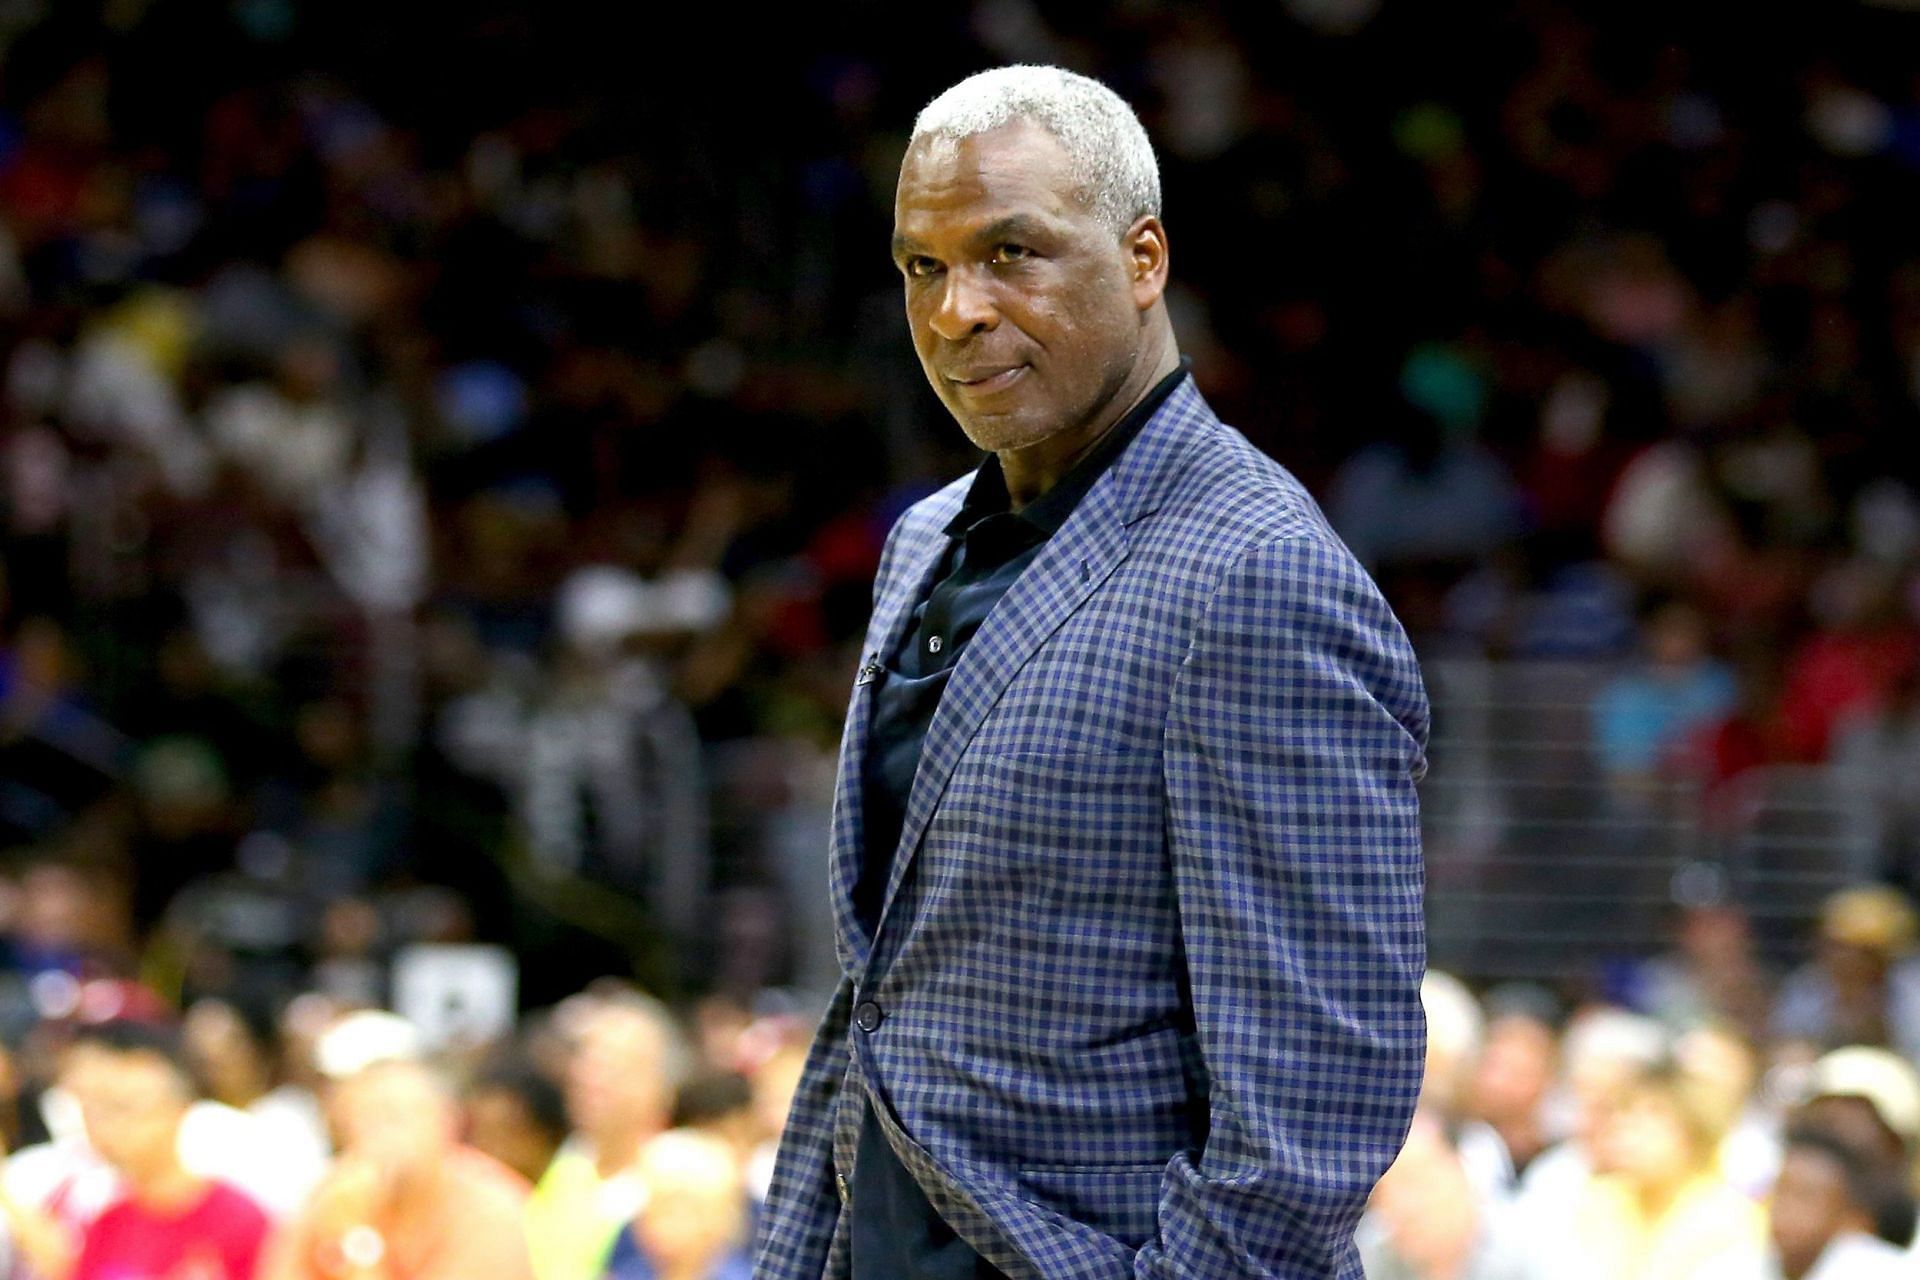 Former NBA veteran and assistant coach Charles Oakley